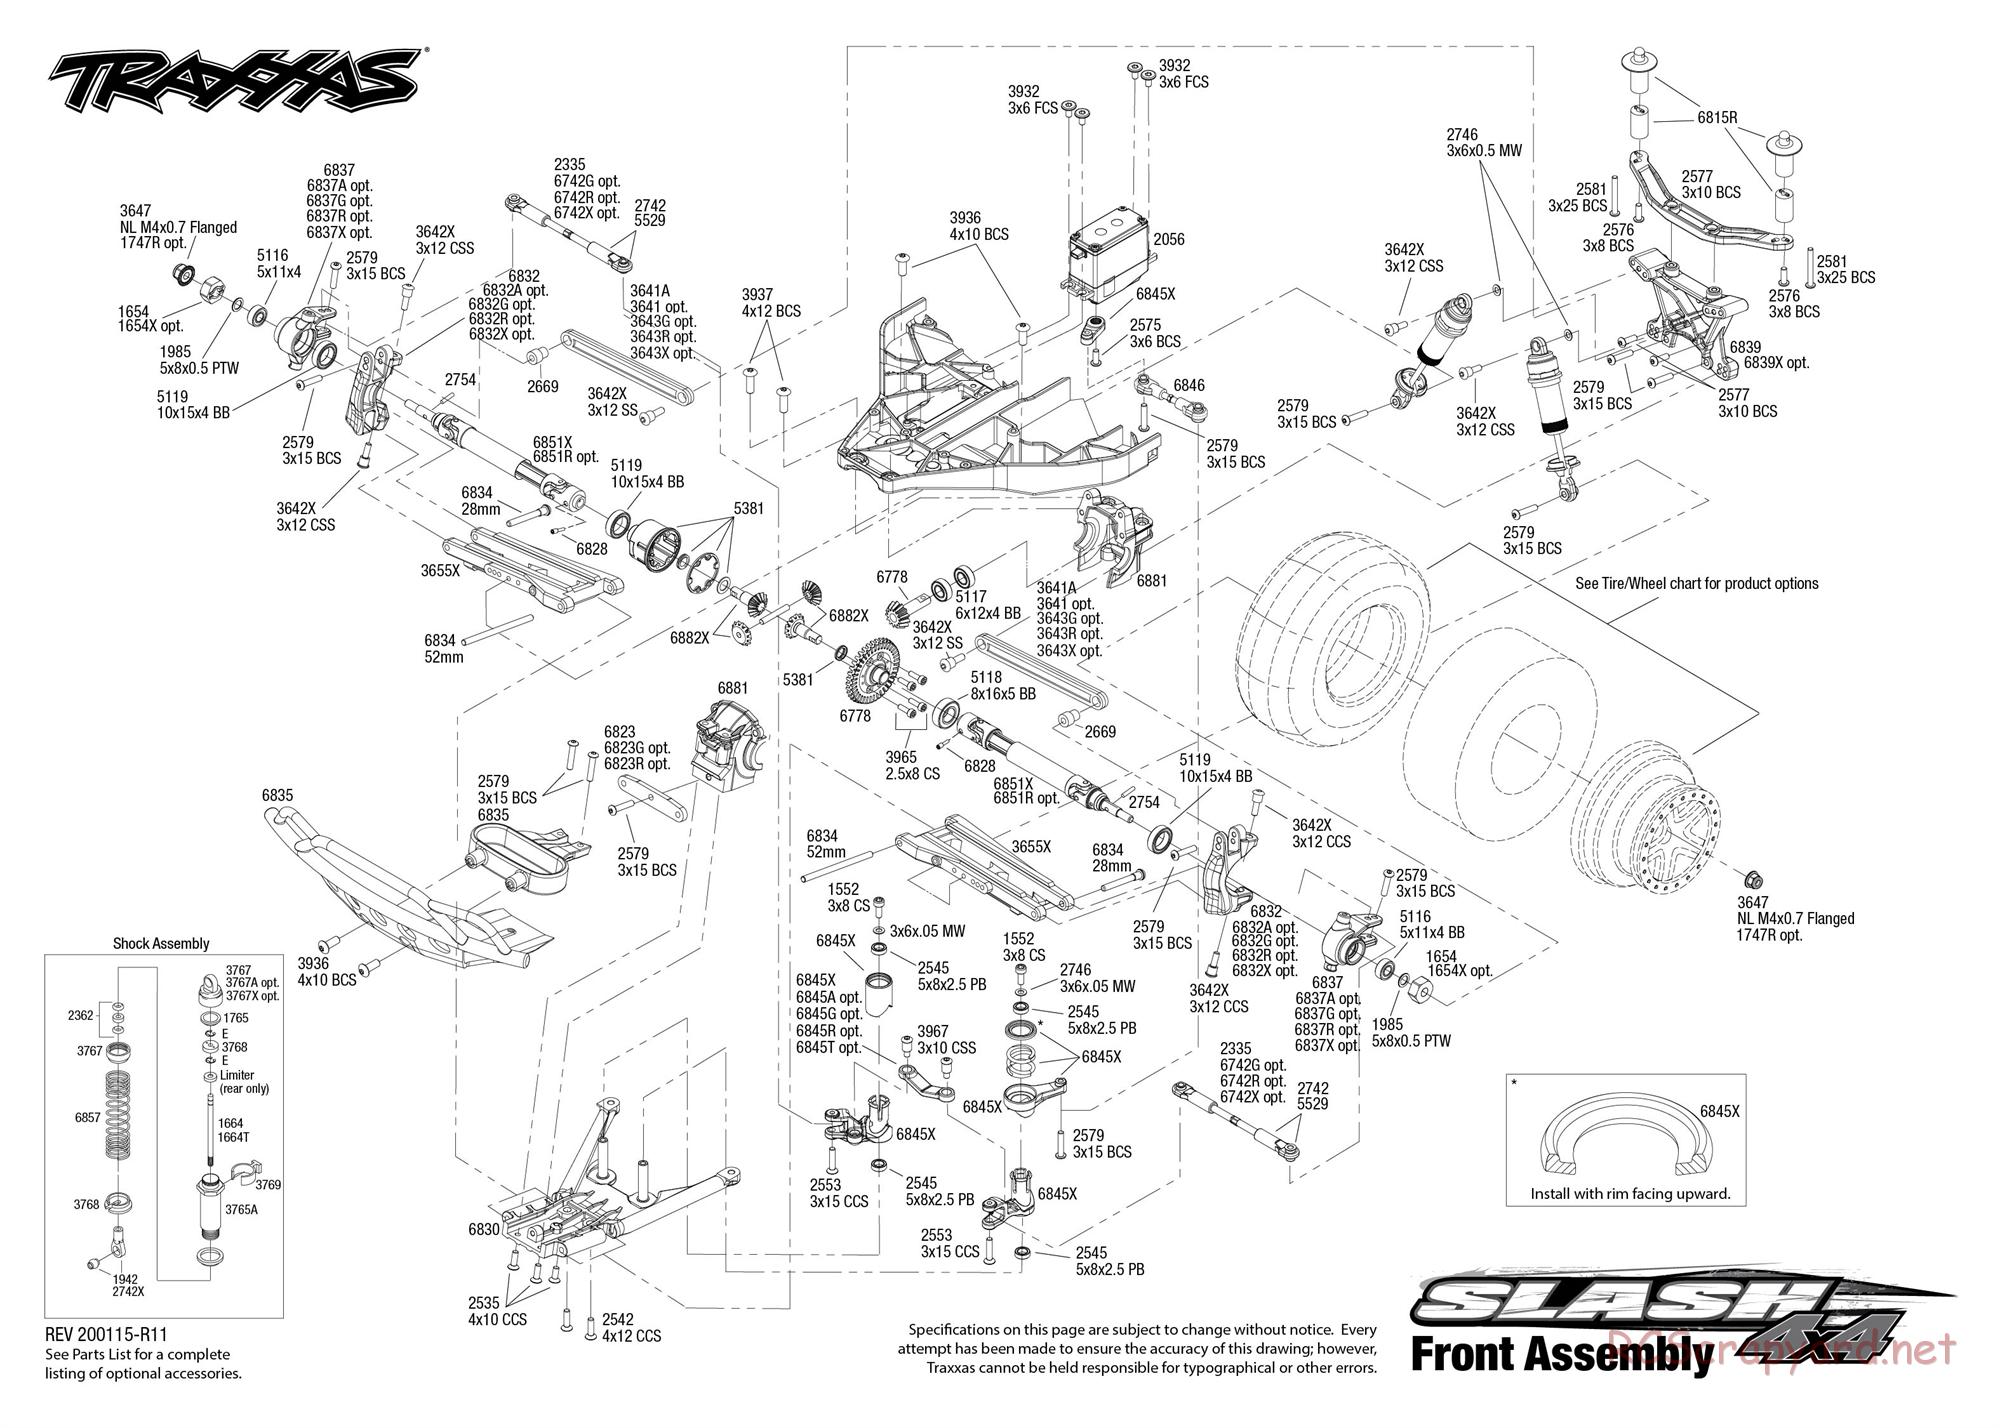 Traxxas - Slash 4x4 Brushed (2018) - Exploded Views - Page 3